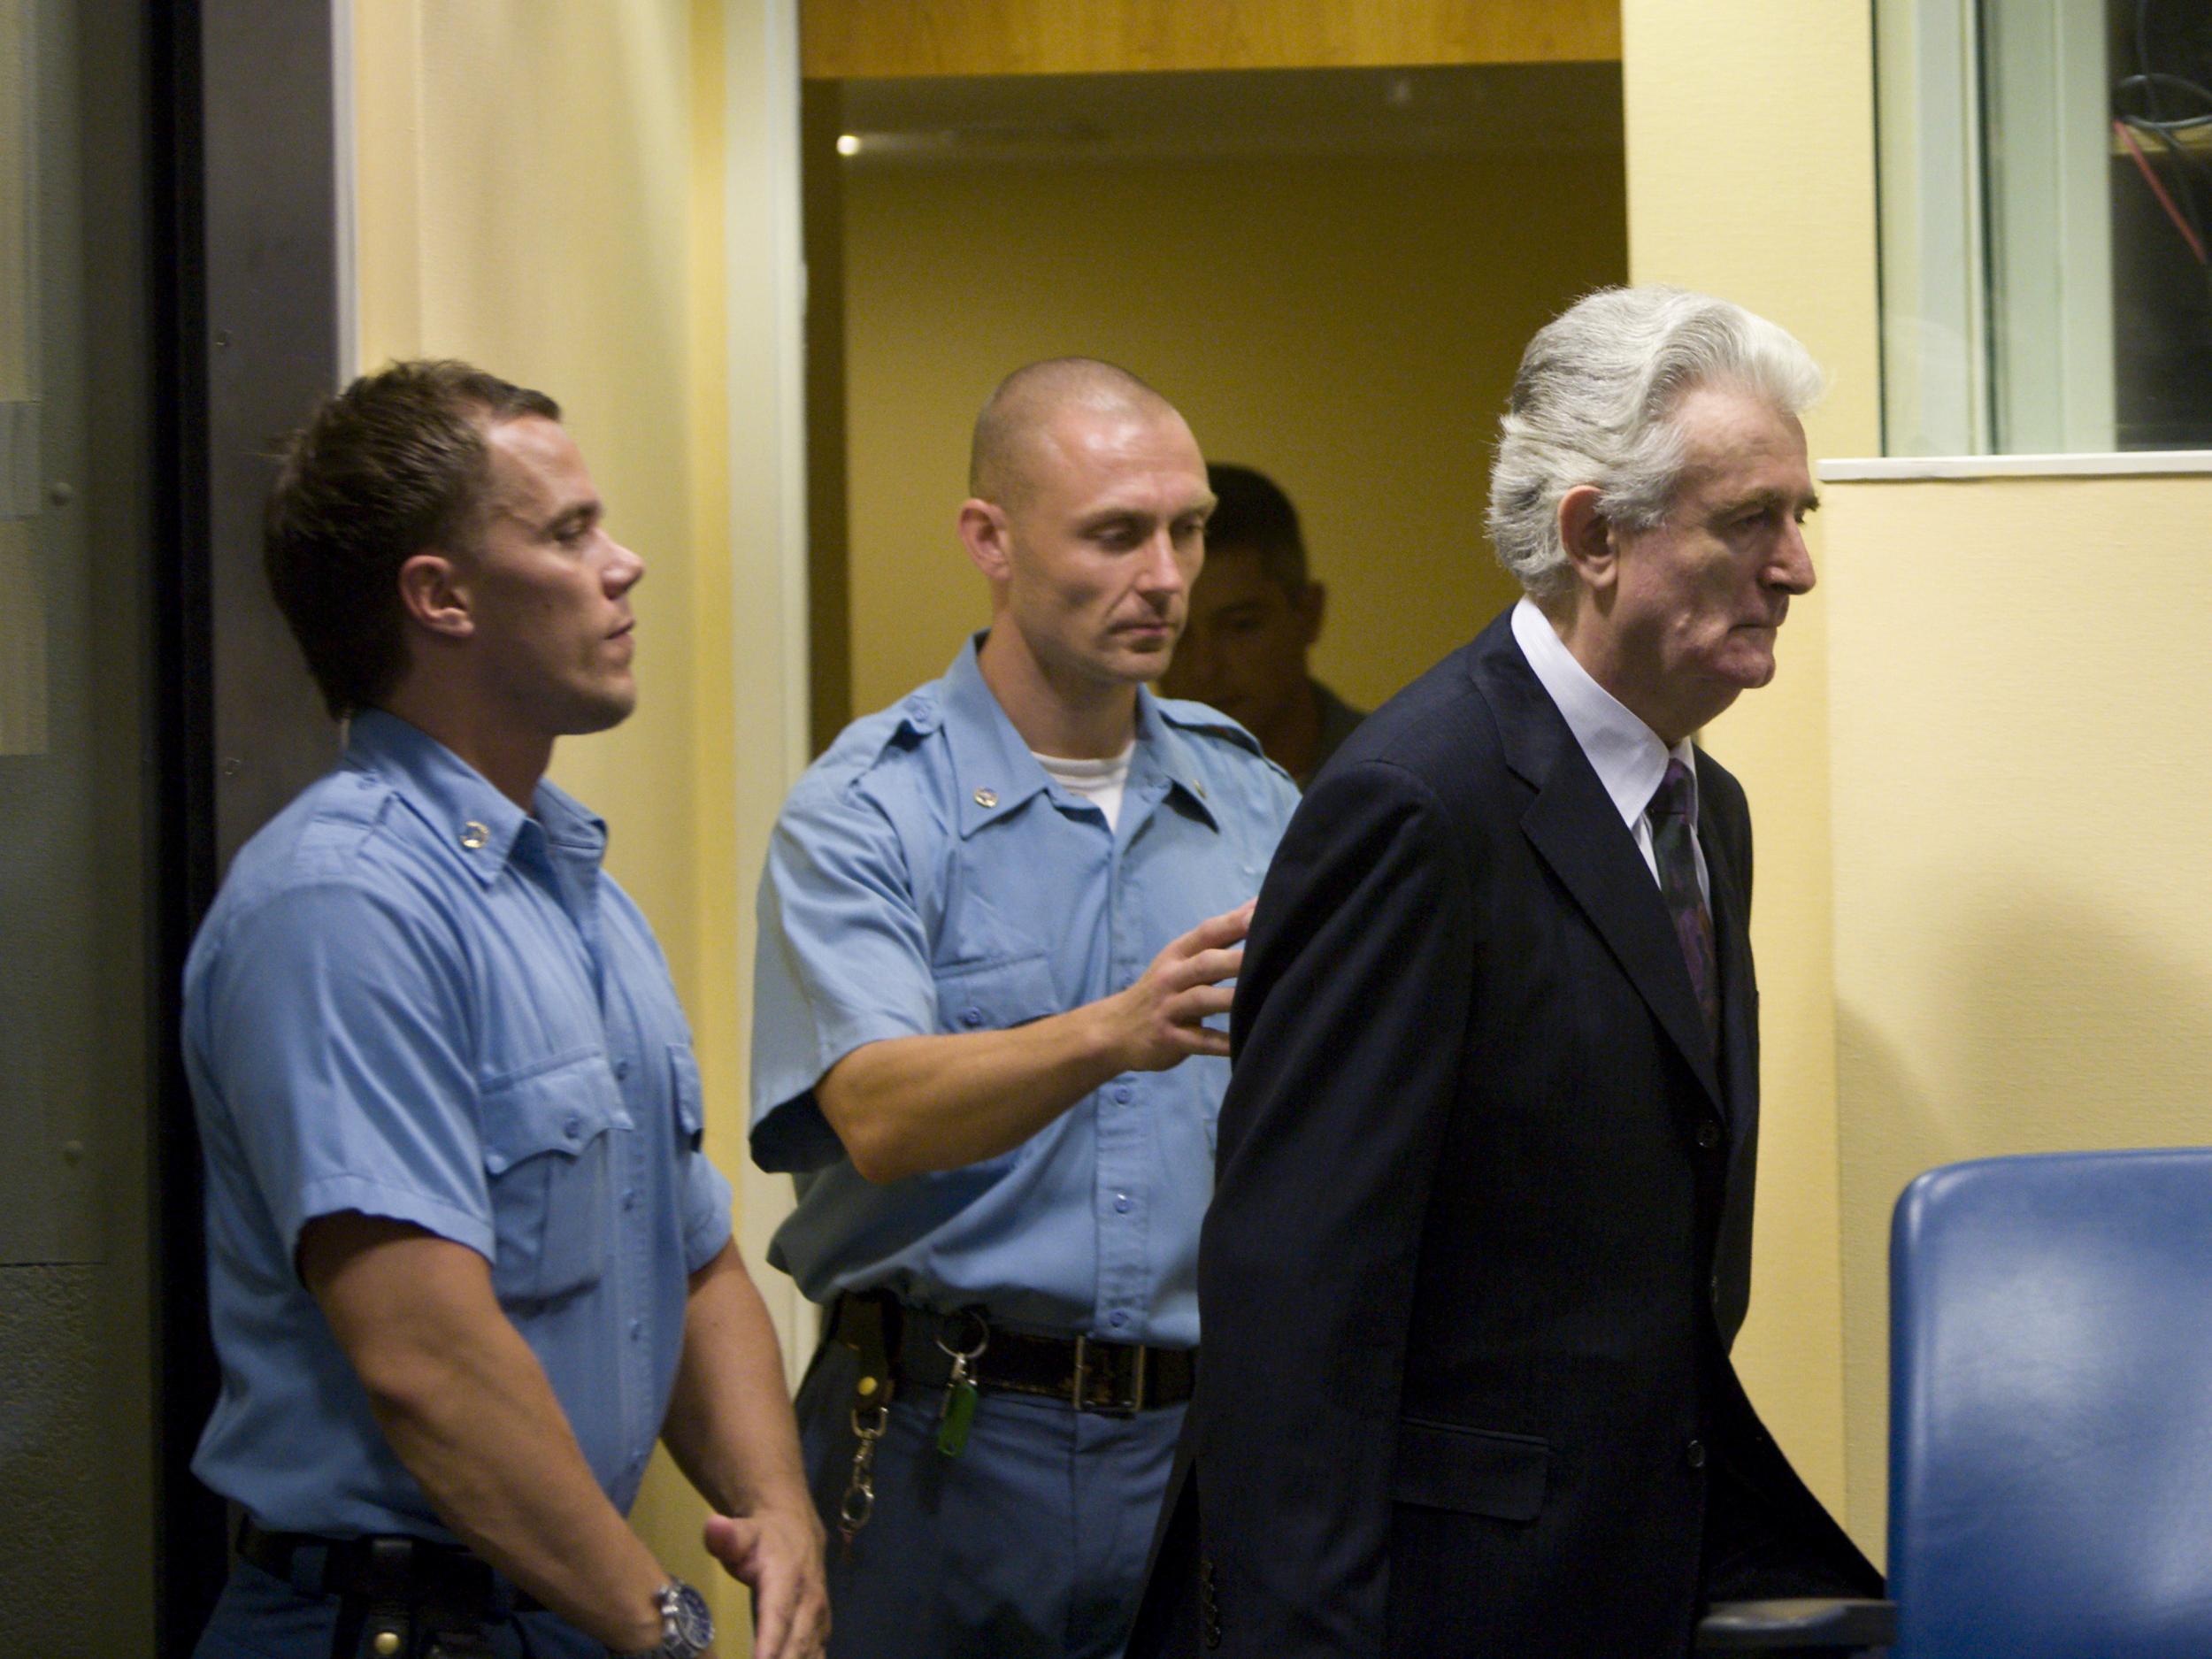 Karadžić first appeared before the tribunal in 2008, following his arrest